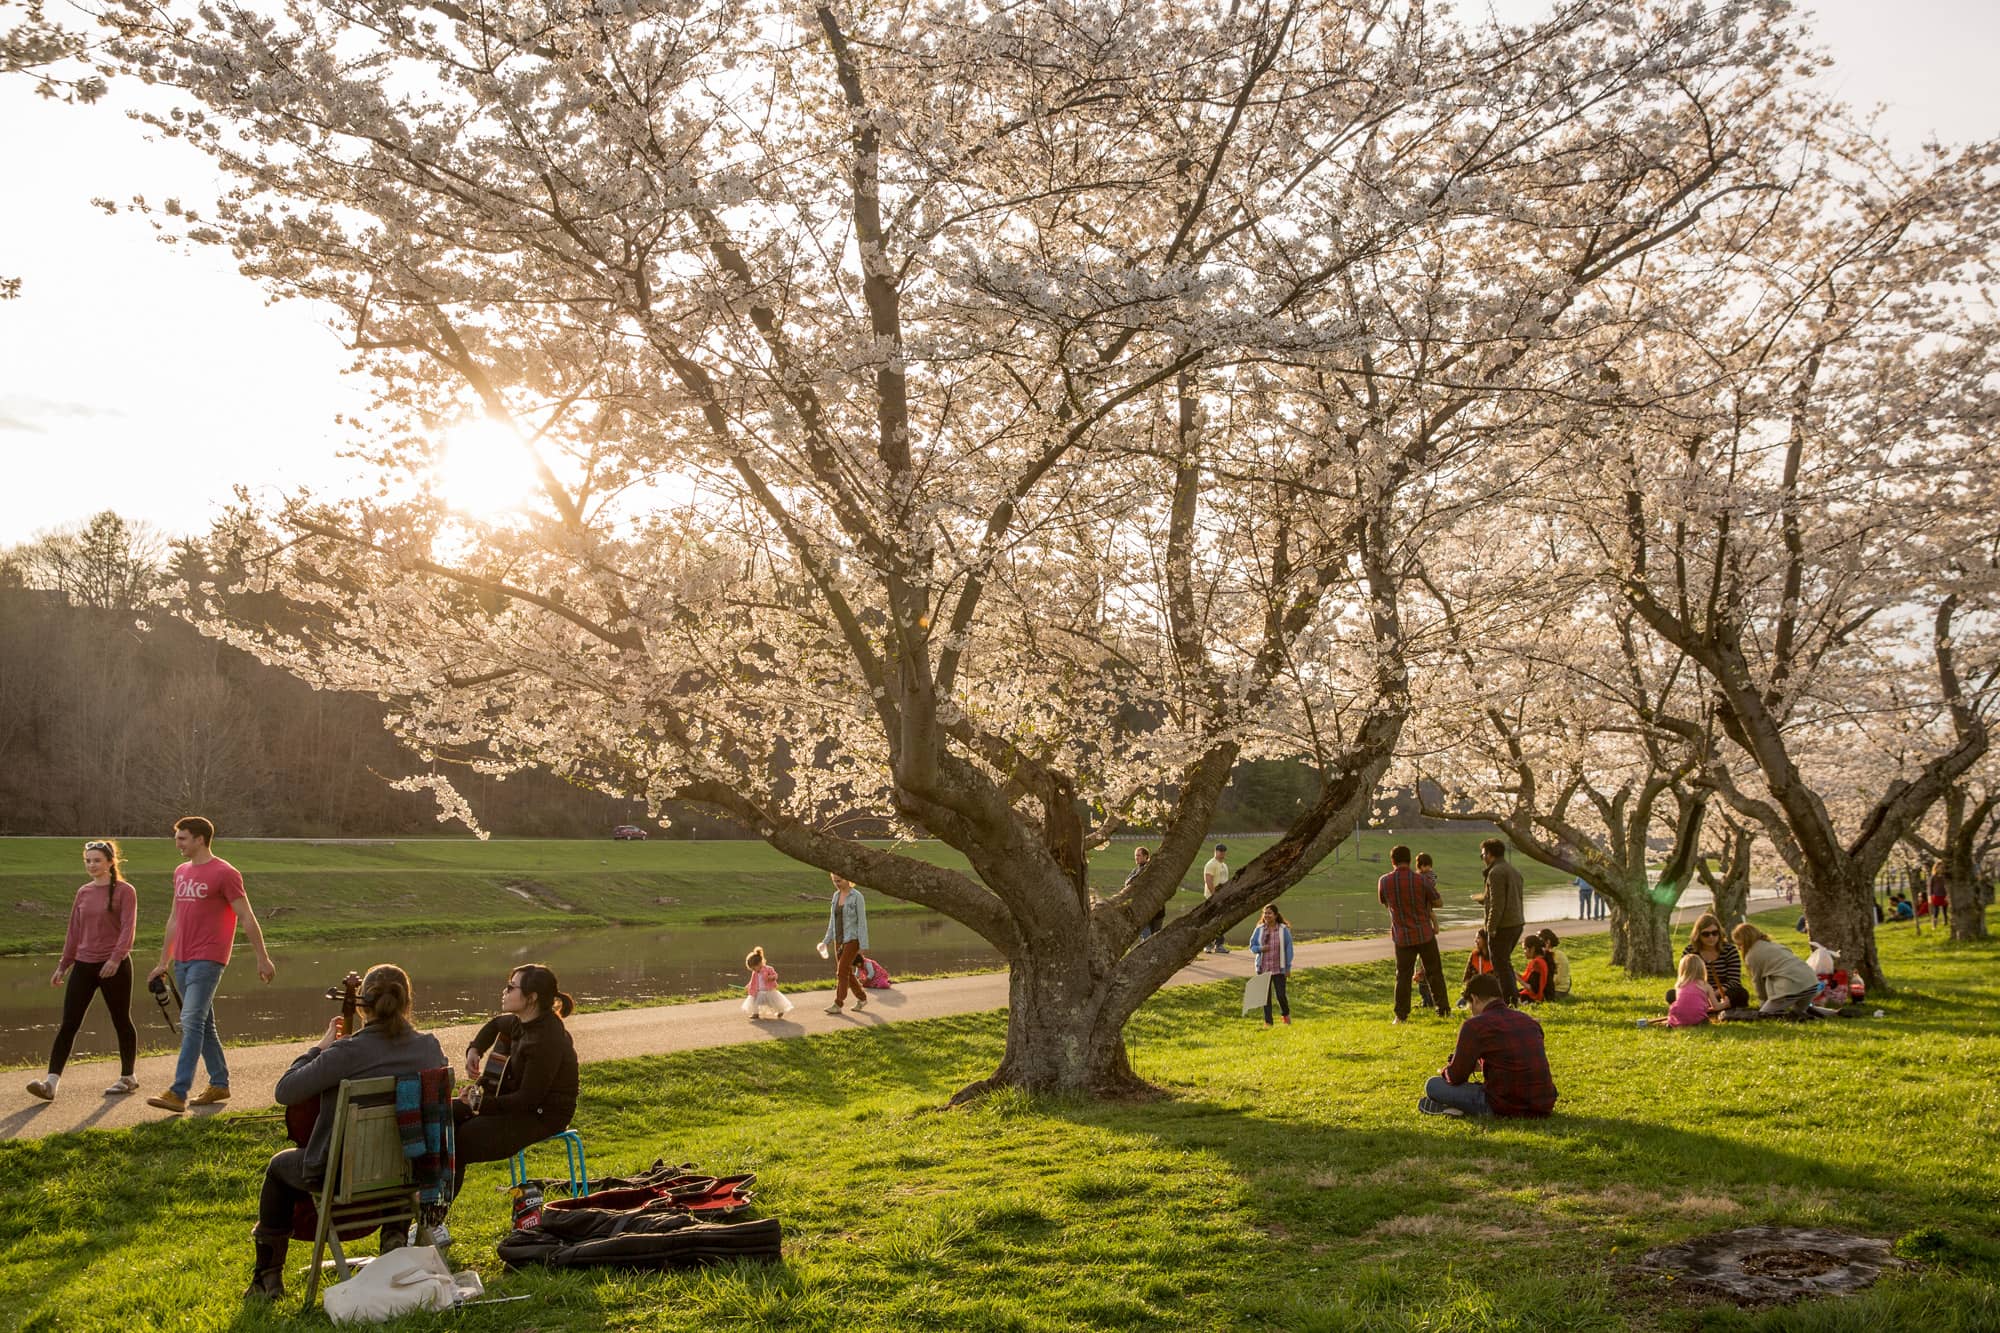 The Japanese cherry blossom trees at Ohio University, located along the Hocking River in Athens, Ohio, are a favorite place for students, faculty, staff, visitors and the entire Athens community to walk, jog, relax, play music and welcome spring.